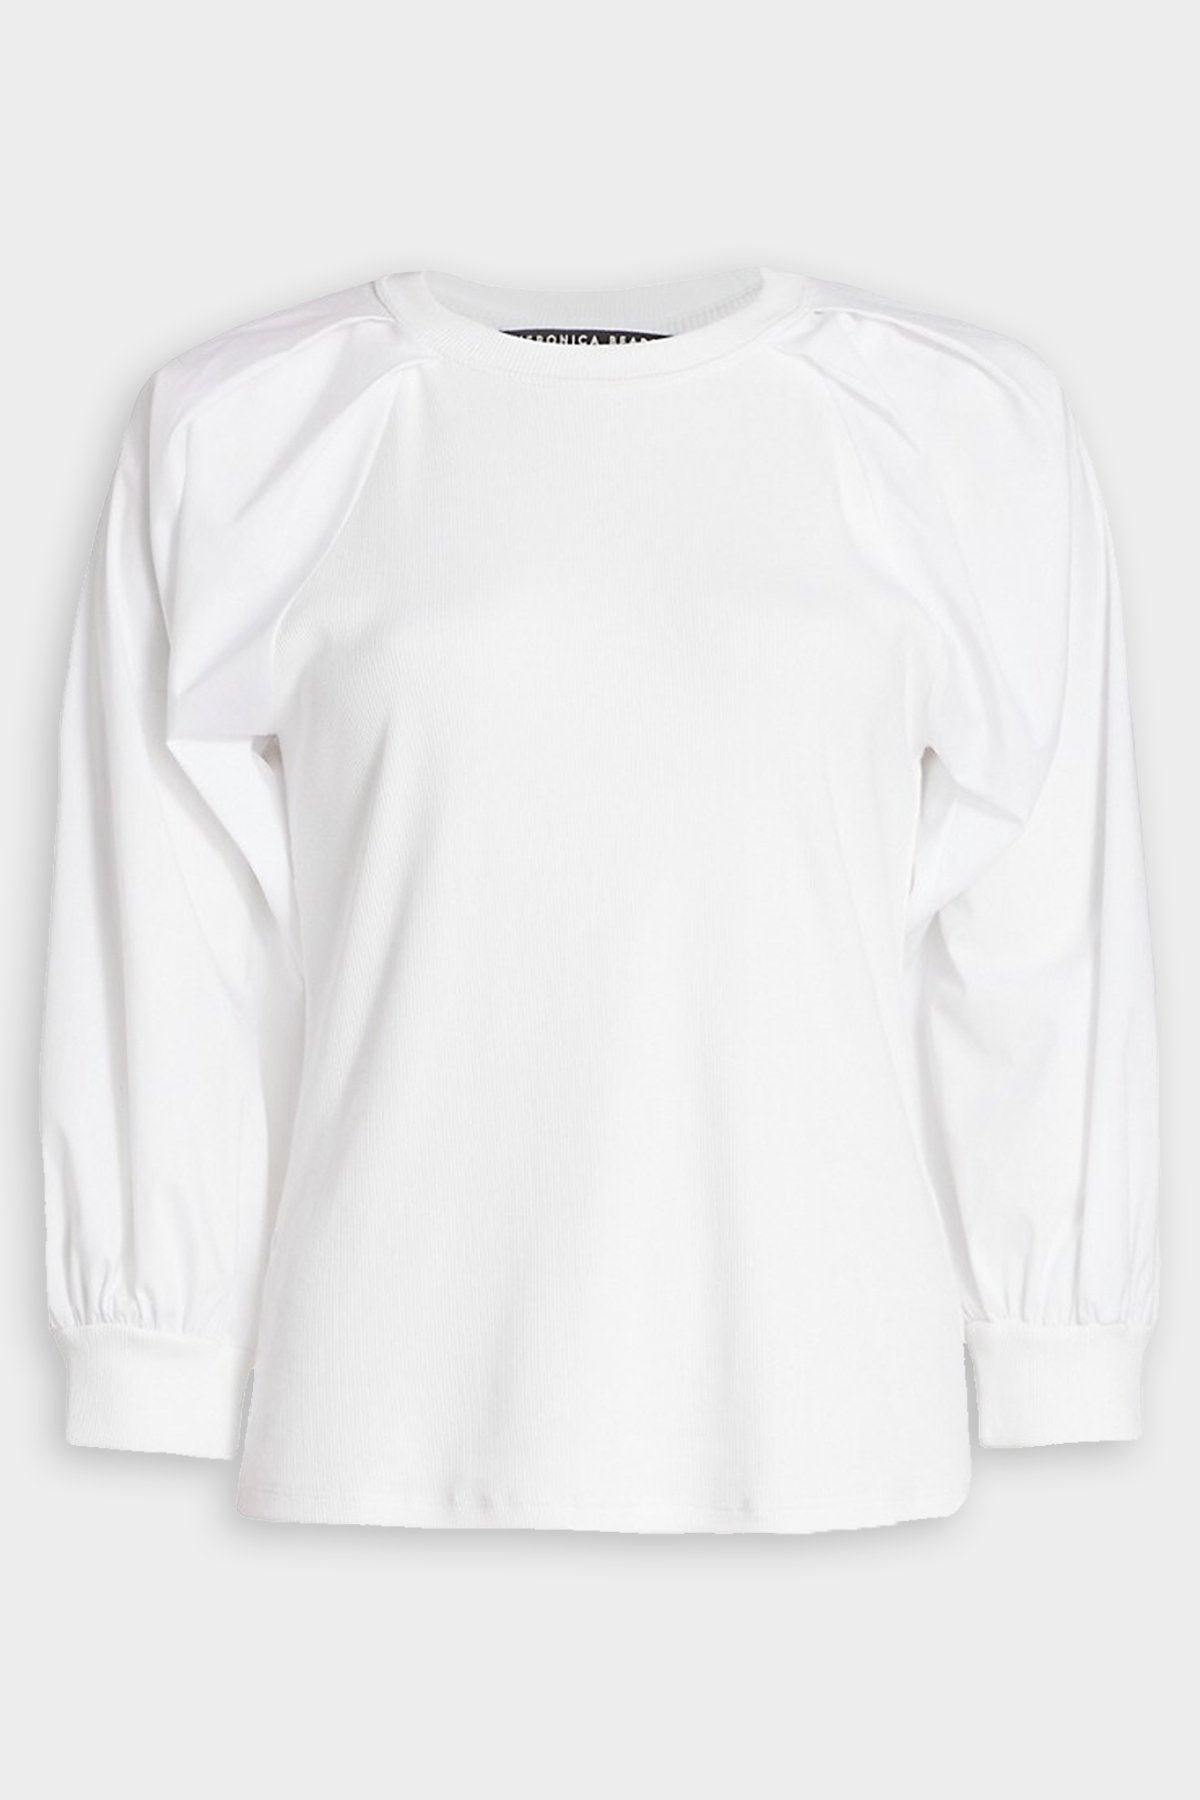 Gibson Pleat-Sleeve Top in White - shop-olivia.com